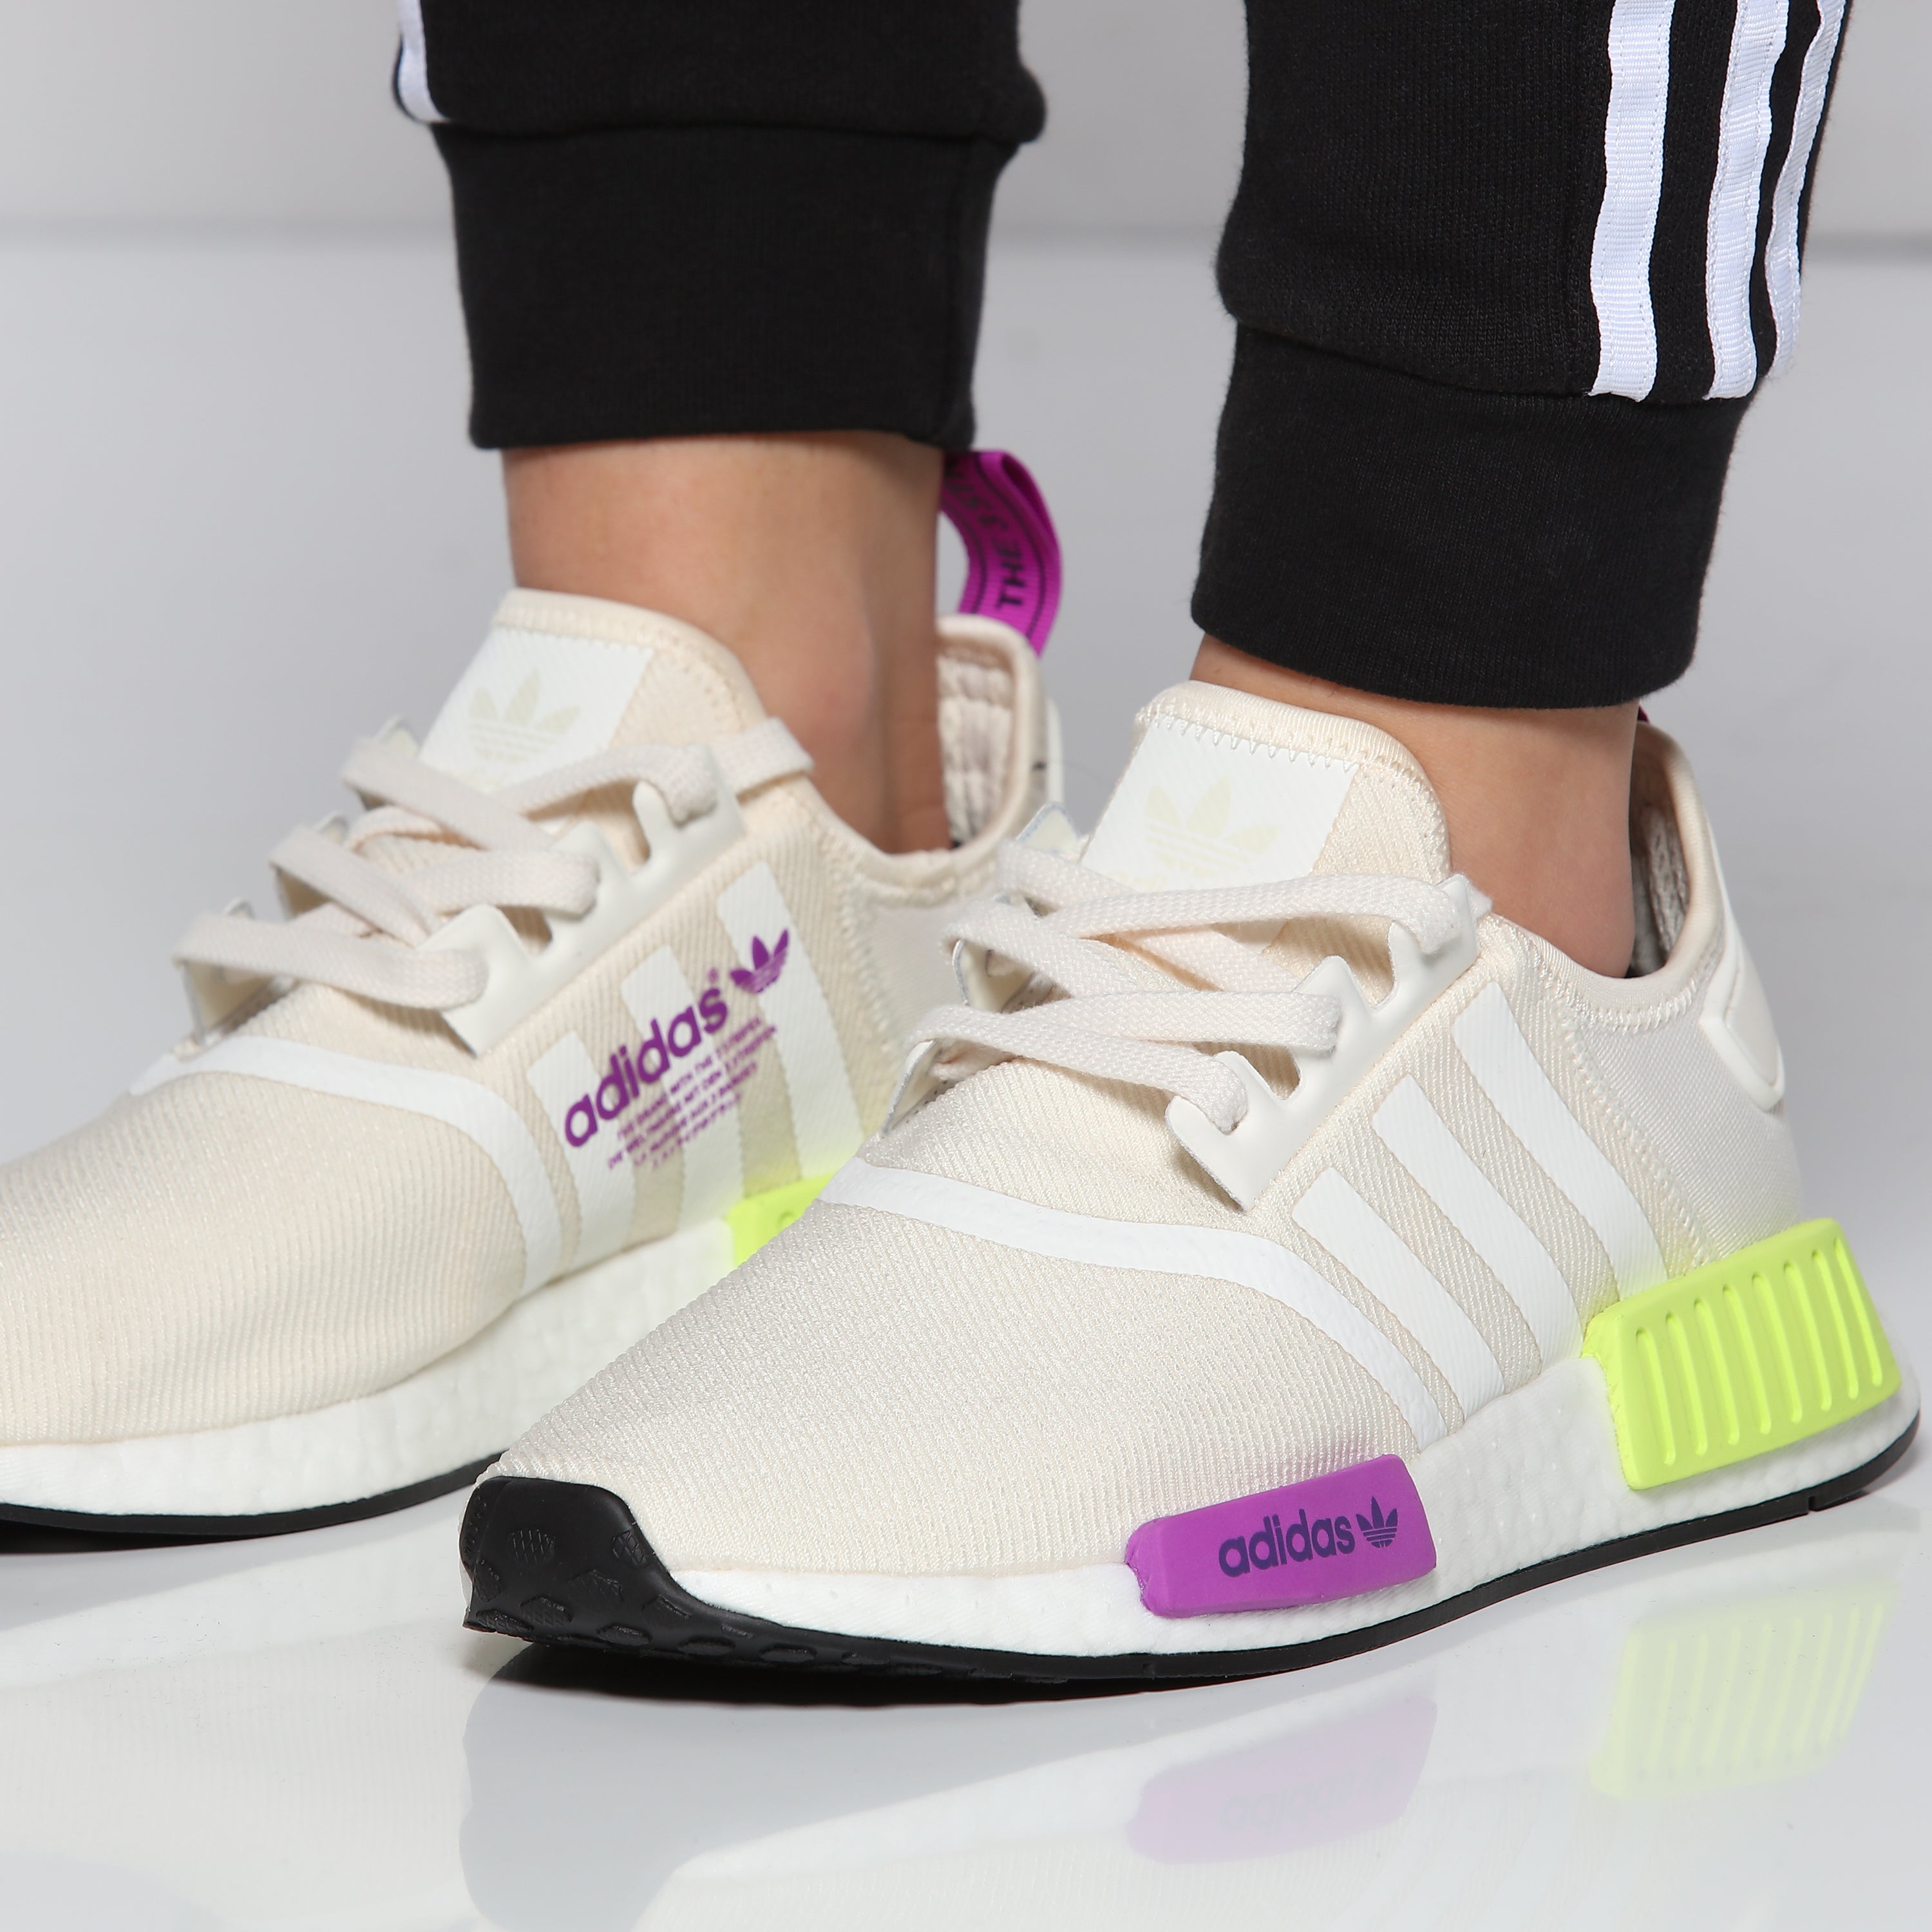 nmd white and purple